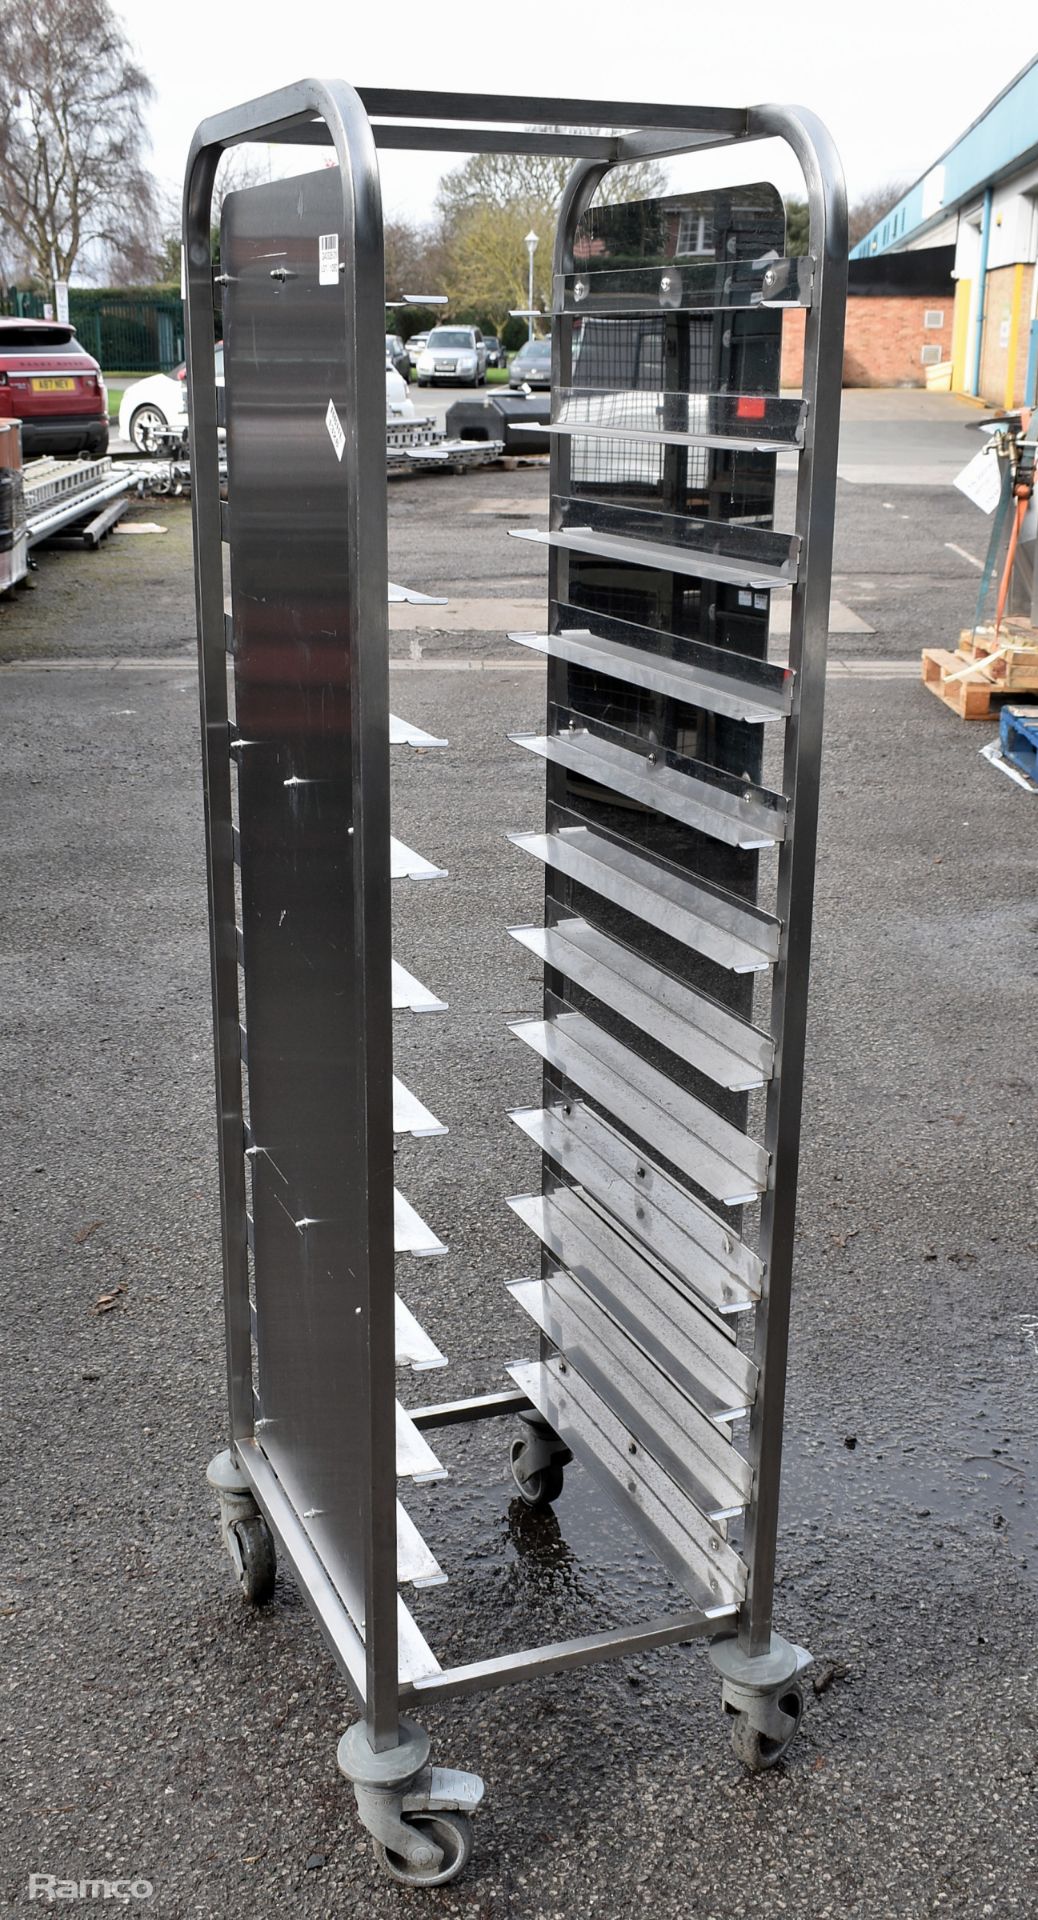 Stainless steel serving tray trolley - L 600 x W 450 x H 1650mm - Image 2 of 3